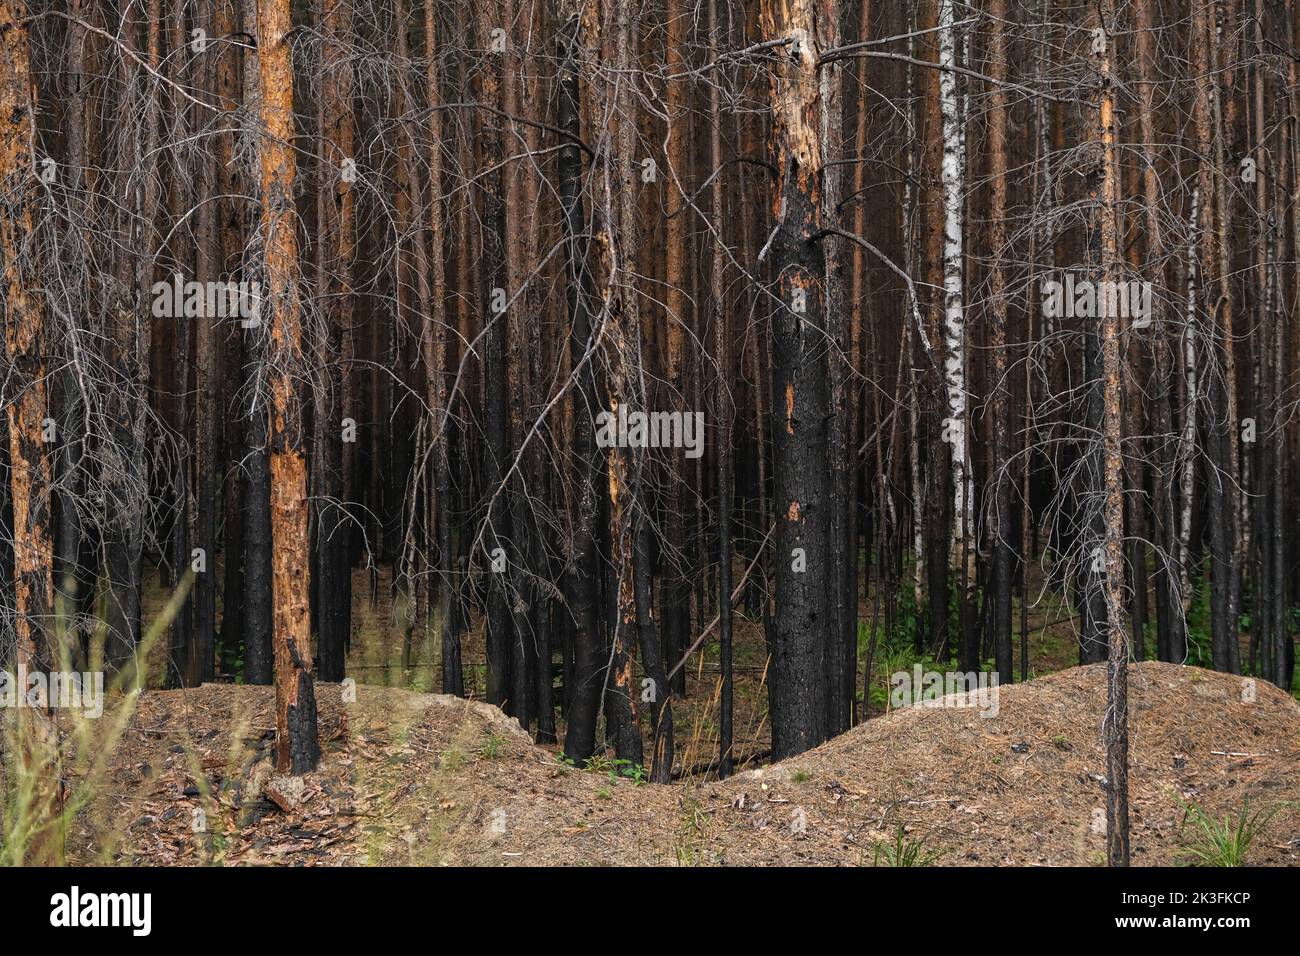 Pine forest after a large-scale fire. Landscape of a burnt forest. Dead forest after fires. New green vegetation after a forest fire. Stock Photo